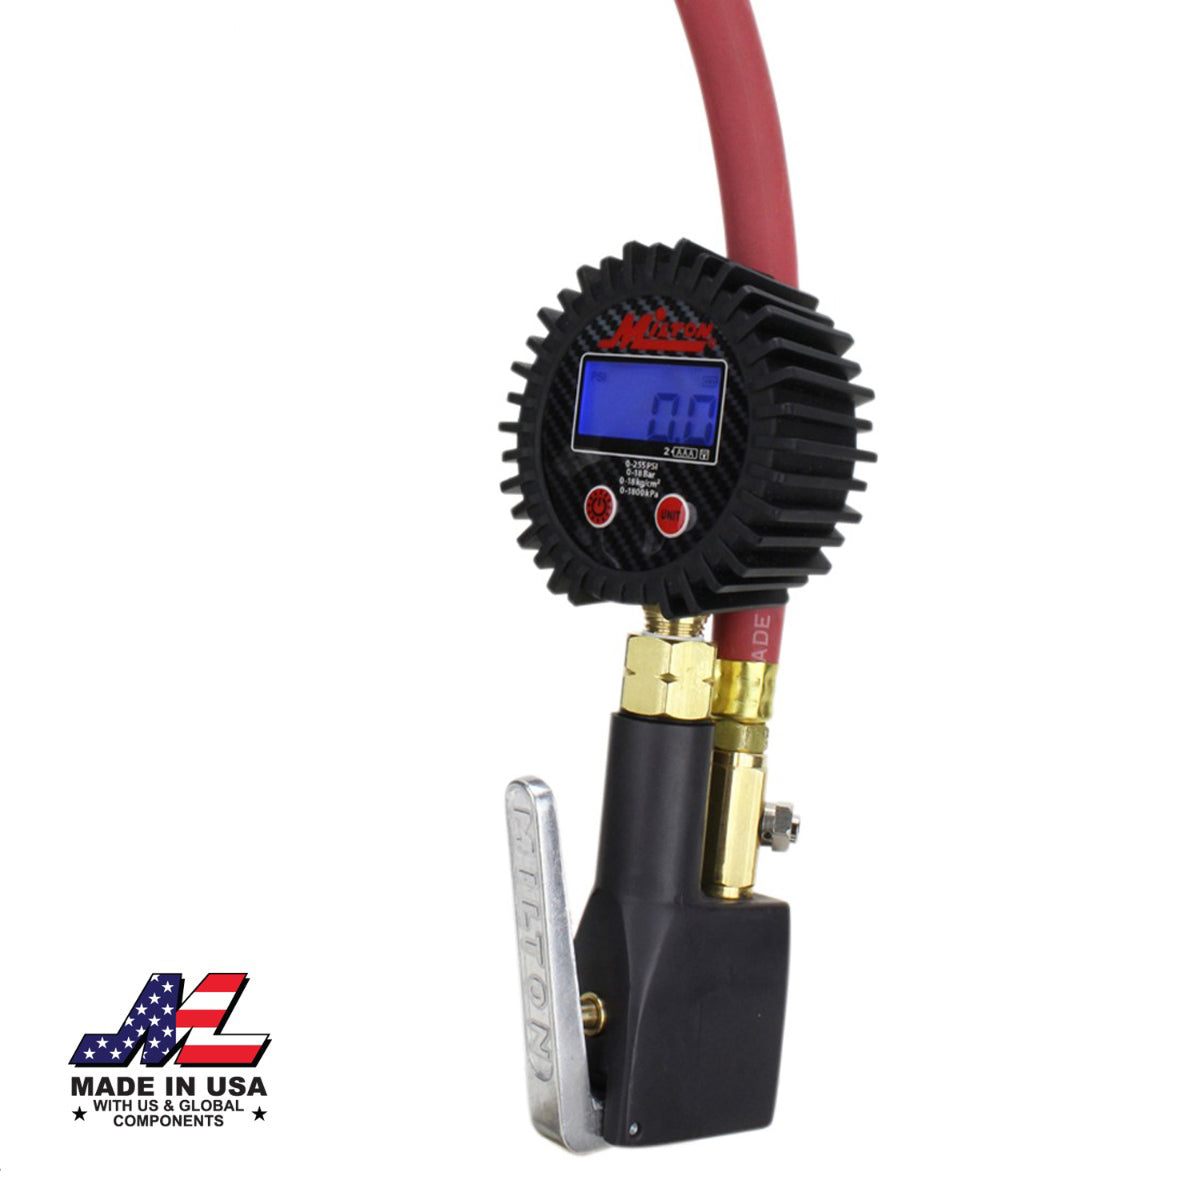 Compact Digital Tire Inflator with Pressure Gauge (255 PSI) - Air Chuck & 15